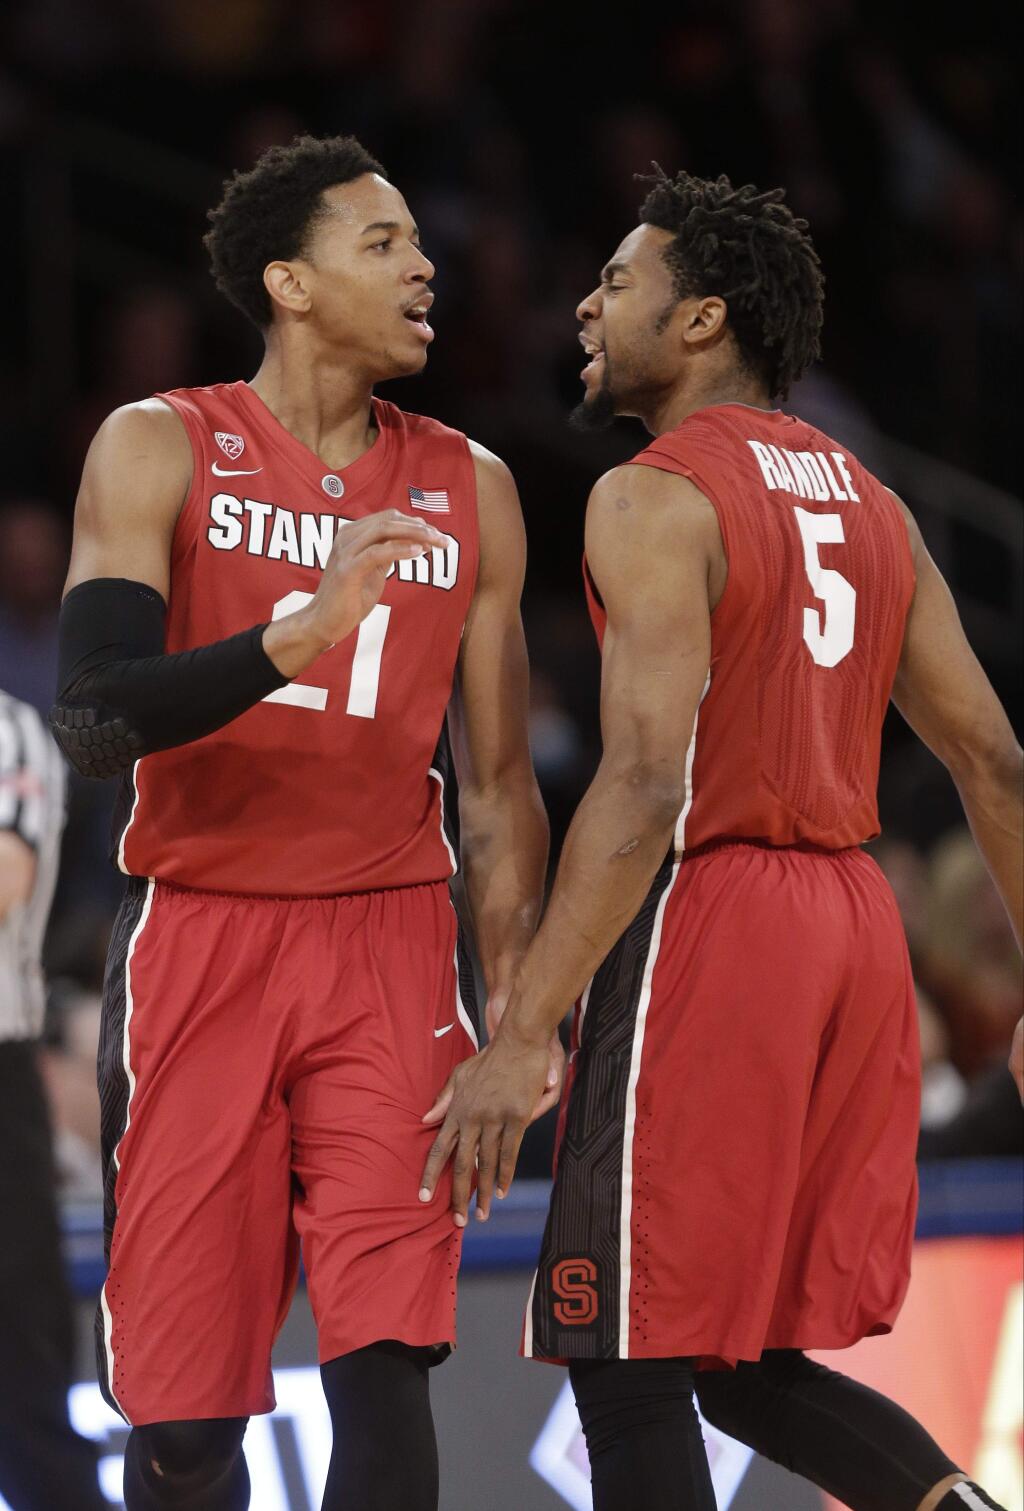 Stanford's Anthony Brown (21) and Chasson Randle (5) celebrates after Brown made a 3-point basket during the first half of a semifinal against Old Dominion at the NIT college basketball tournament Tuesday, March 31, 2015, in New York. (AP Photo/Frank Franklin II)